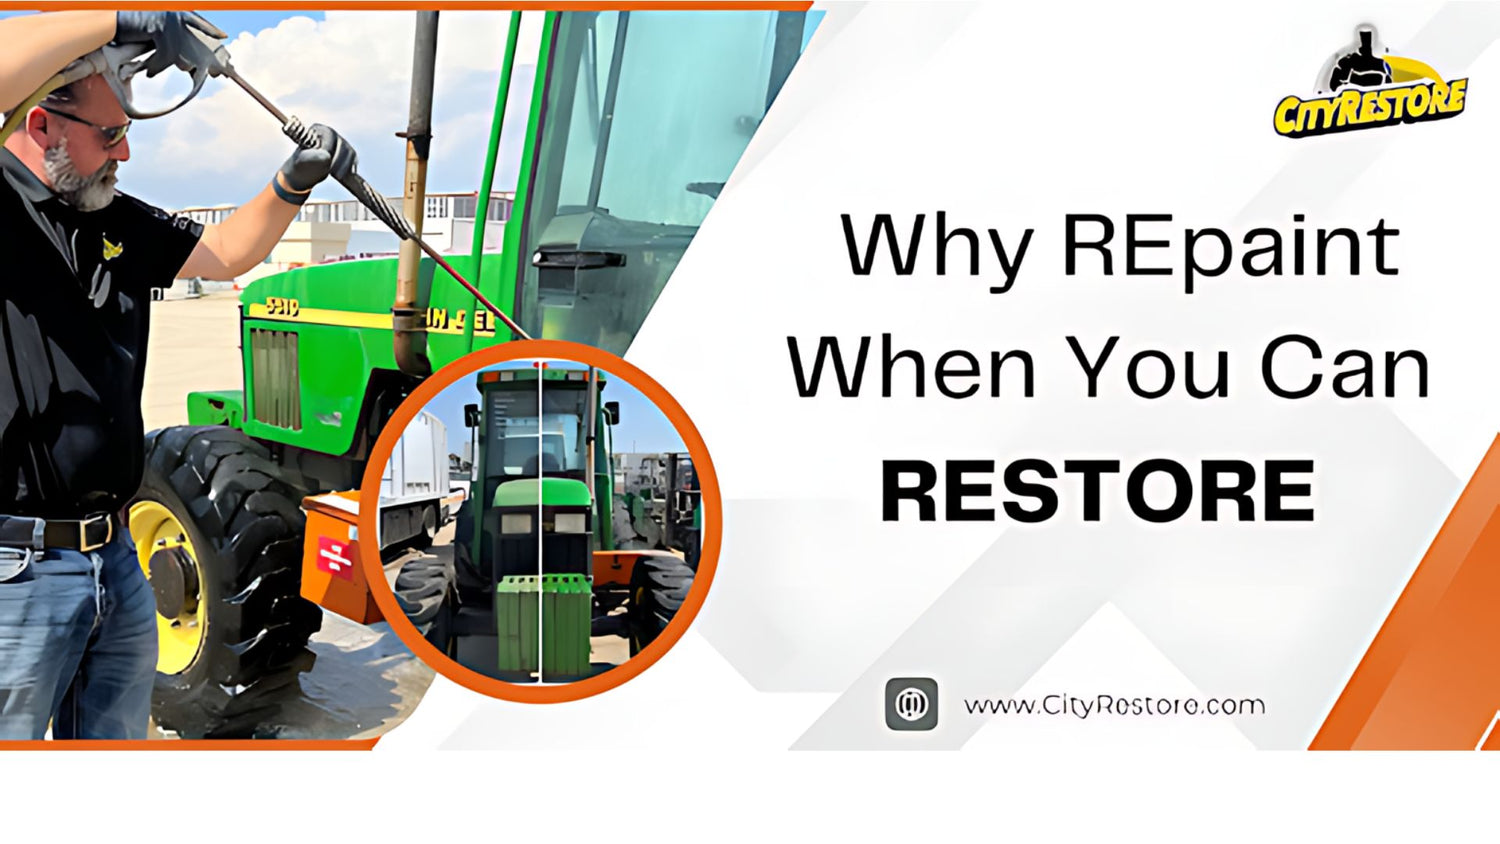 Why REpaint when you can RESTORE?